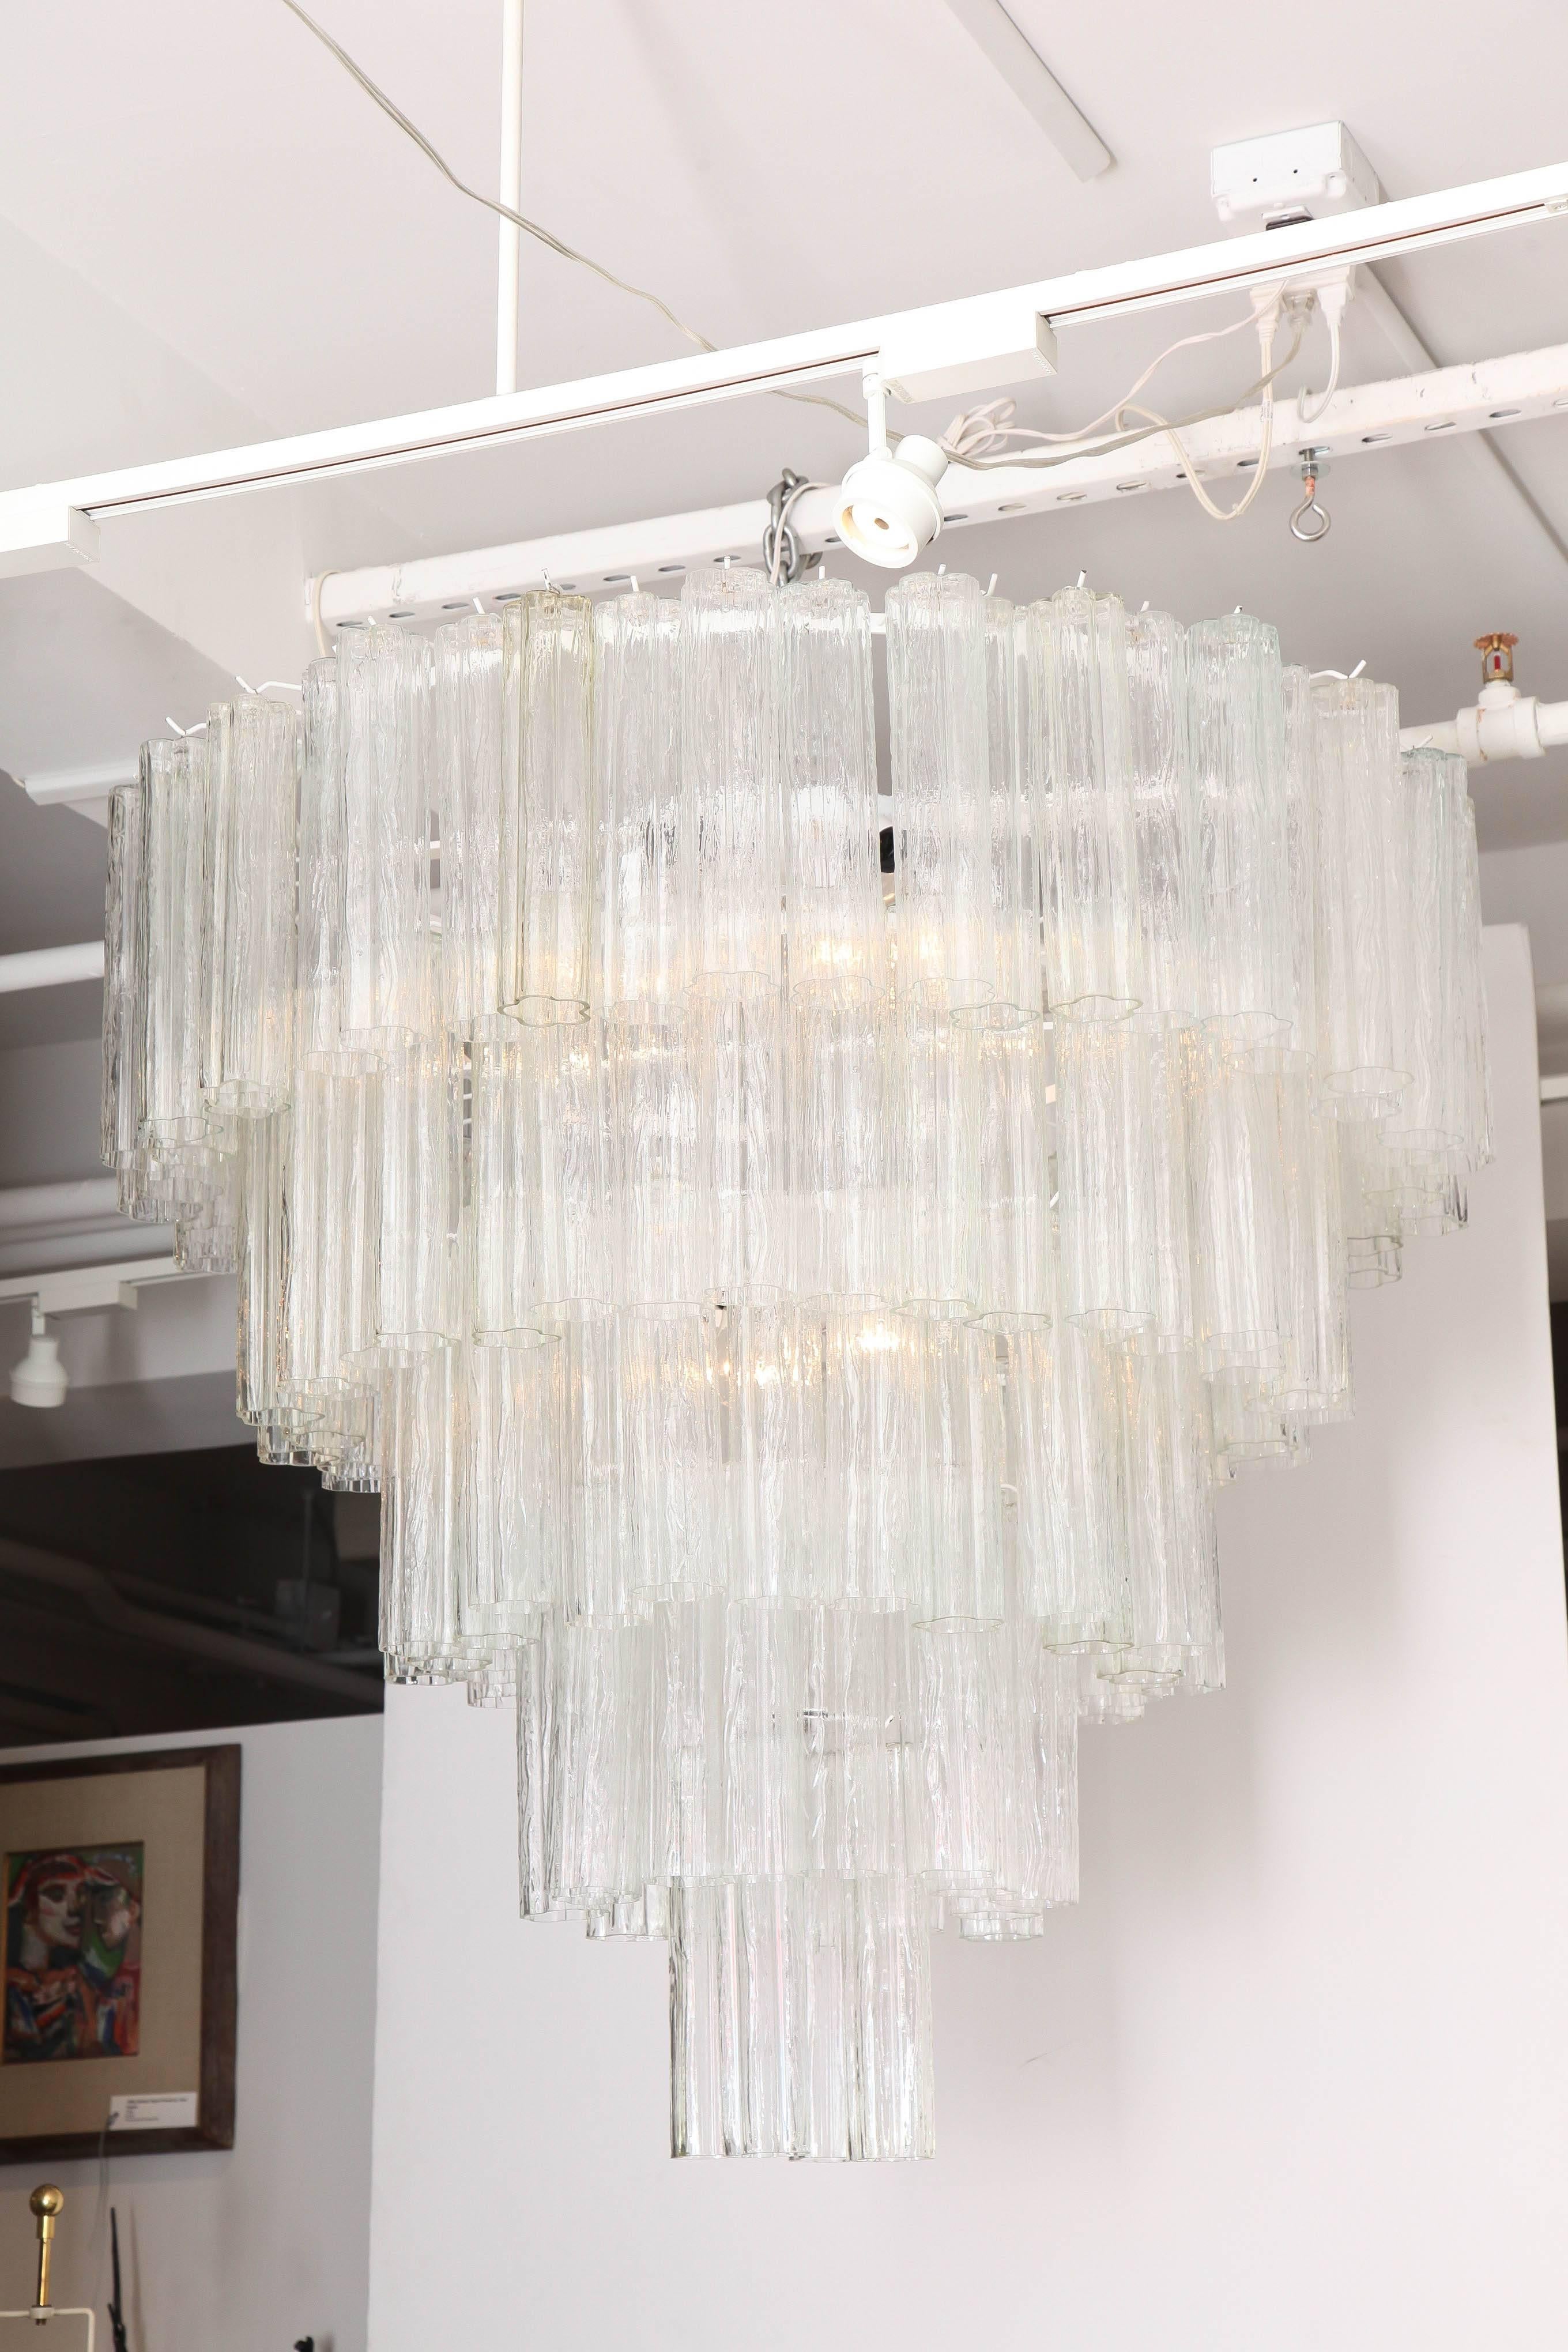 Monumental five-tier Tronchi tube chandelier by Venini and sold through Camer Glass. Glass tubes have a slight ice textured effect and are suspended from a white enamel frame. Polished nickel chain and canopy included. 